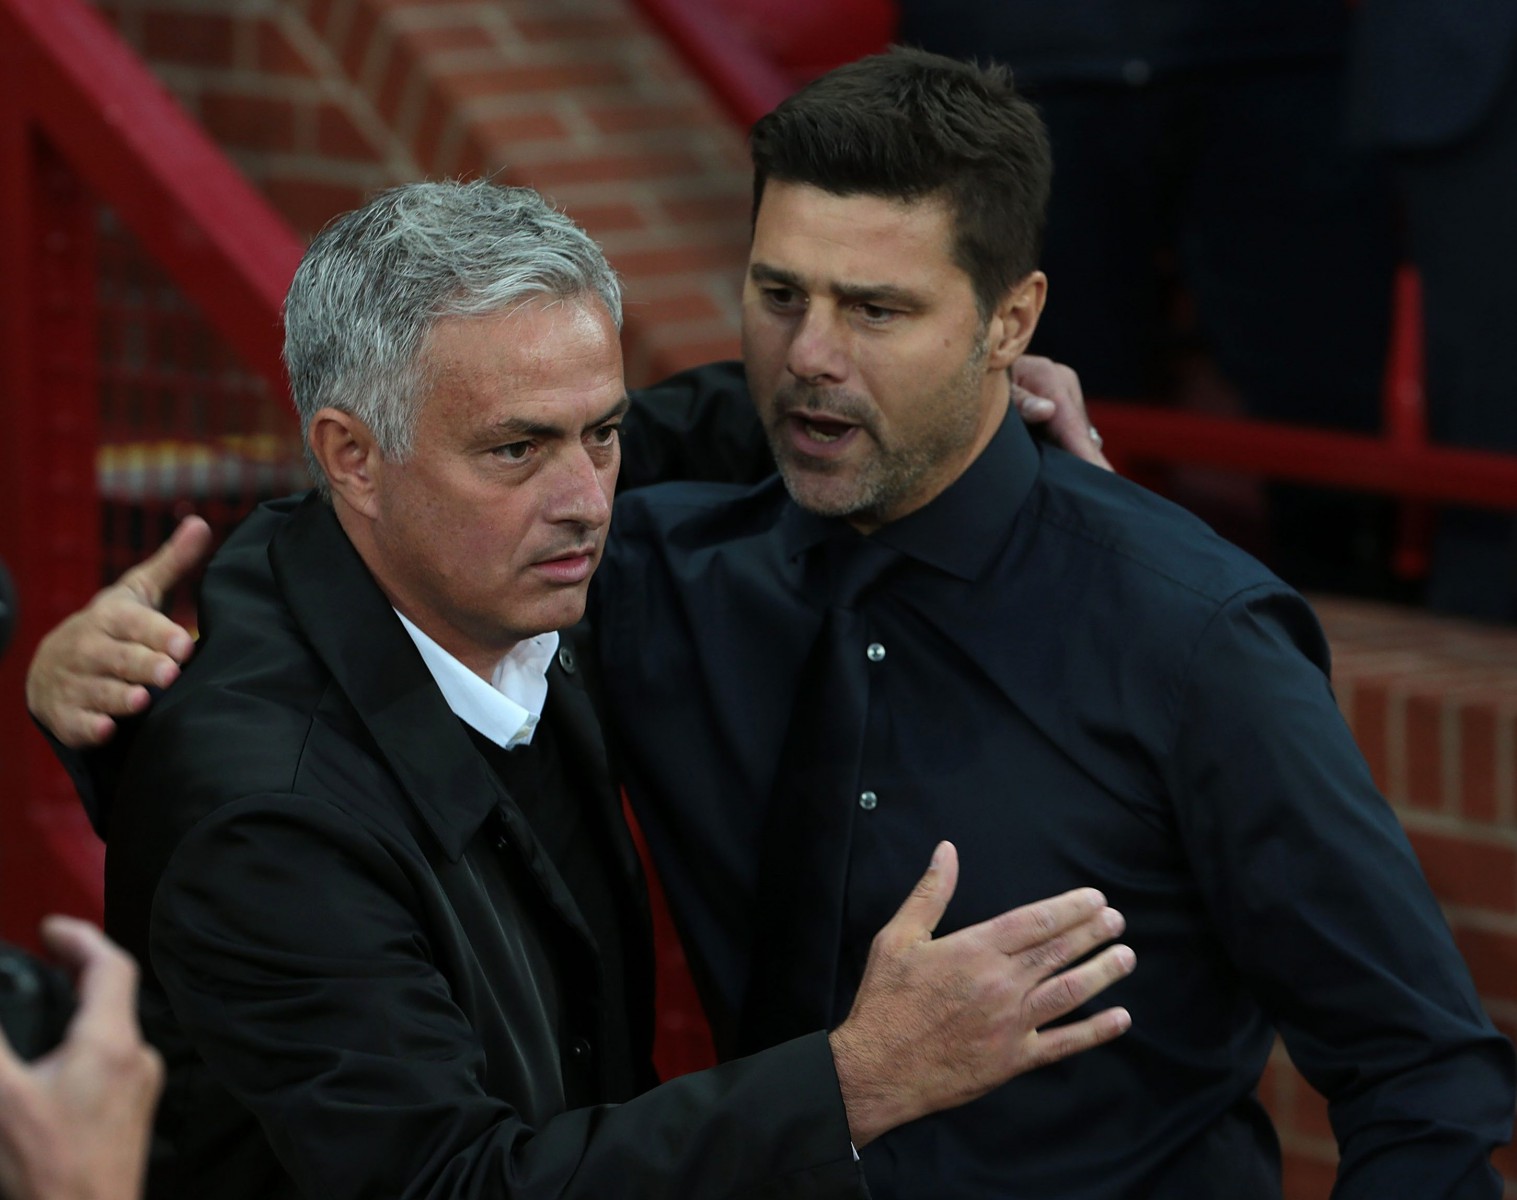 , Arsenal should hire ex-Spurs boss Pochettino to nurture young players and give him big transfer kitty, says Keown